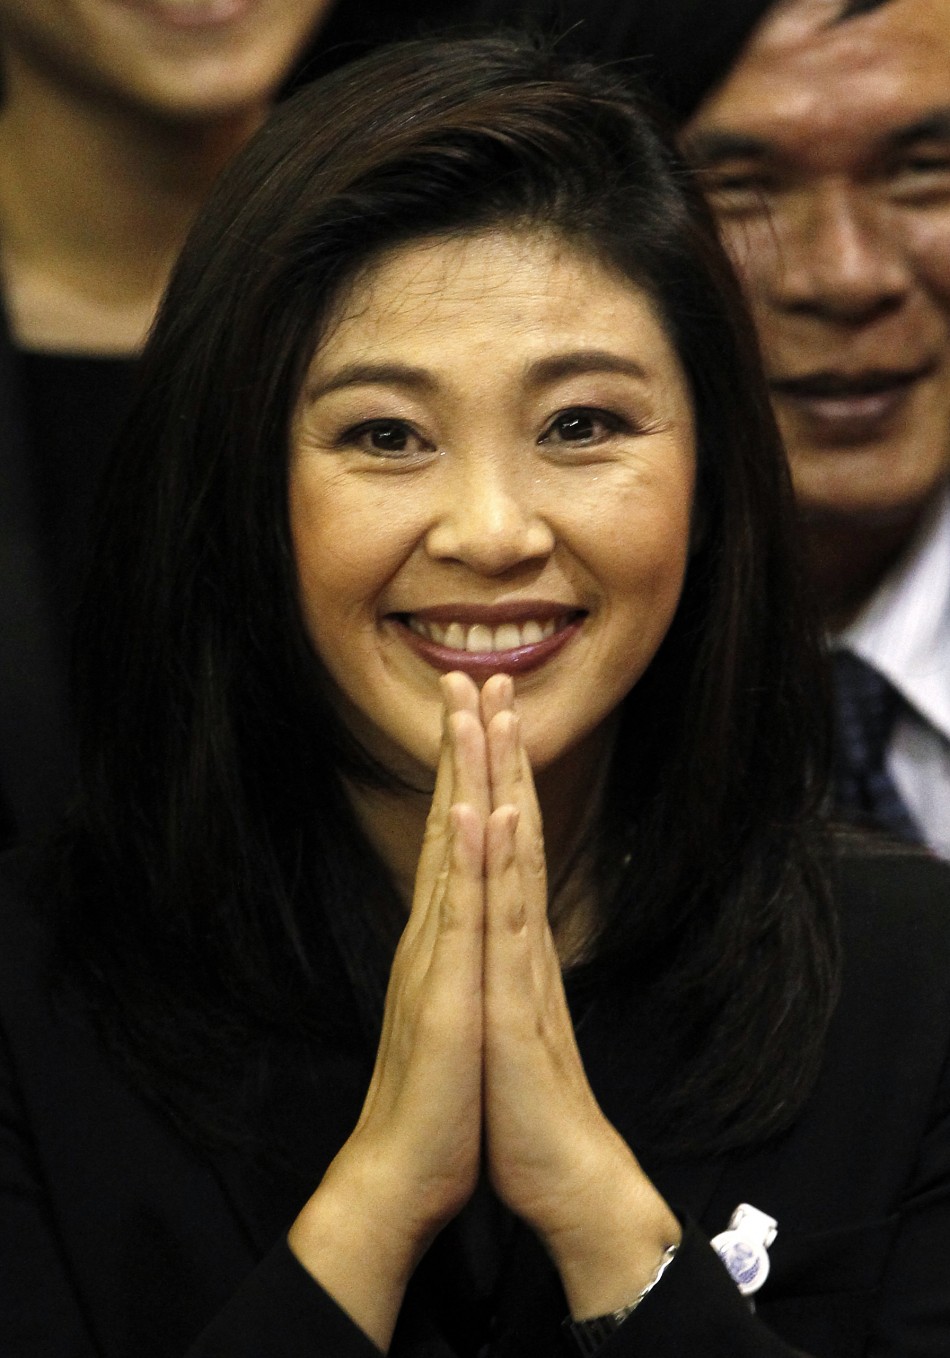 Thailands new PM Shinawatra of the Puea Thai Party gestures to members of parliament moments after being elected as the countrys 28th prime minister in Bangkok